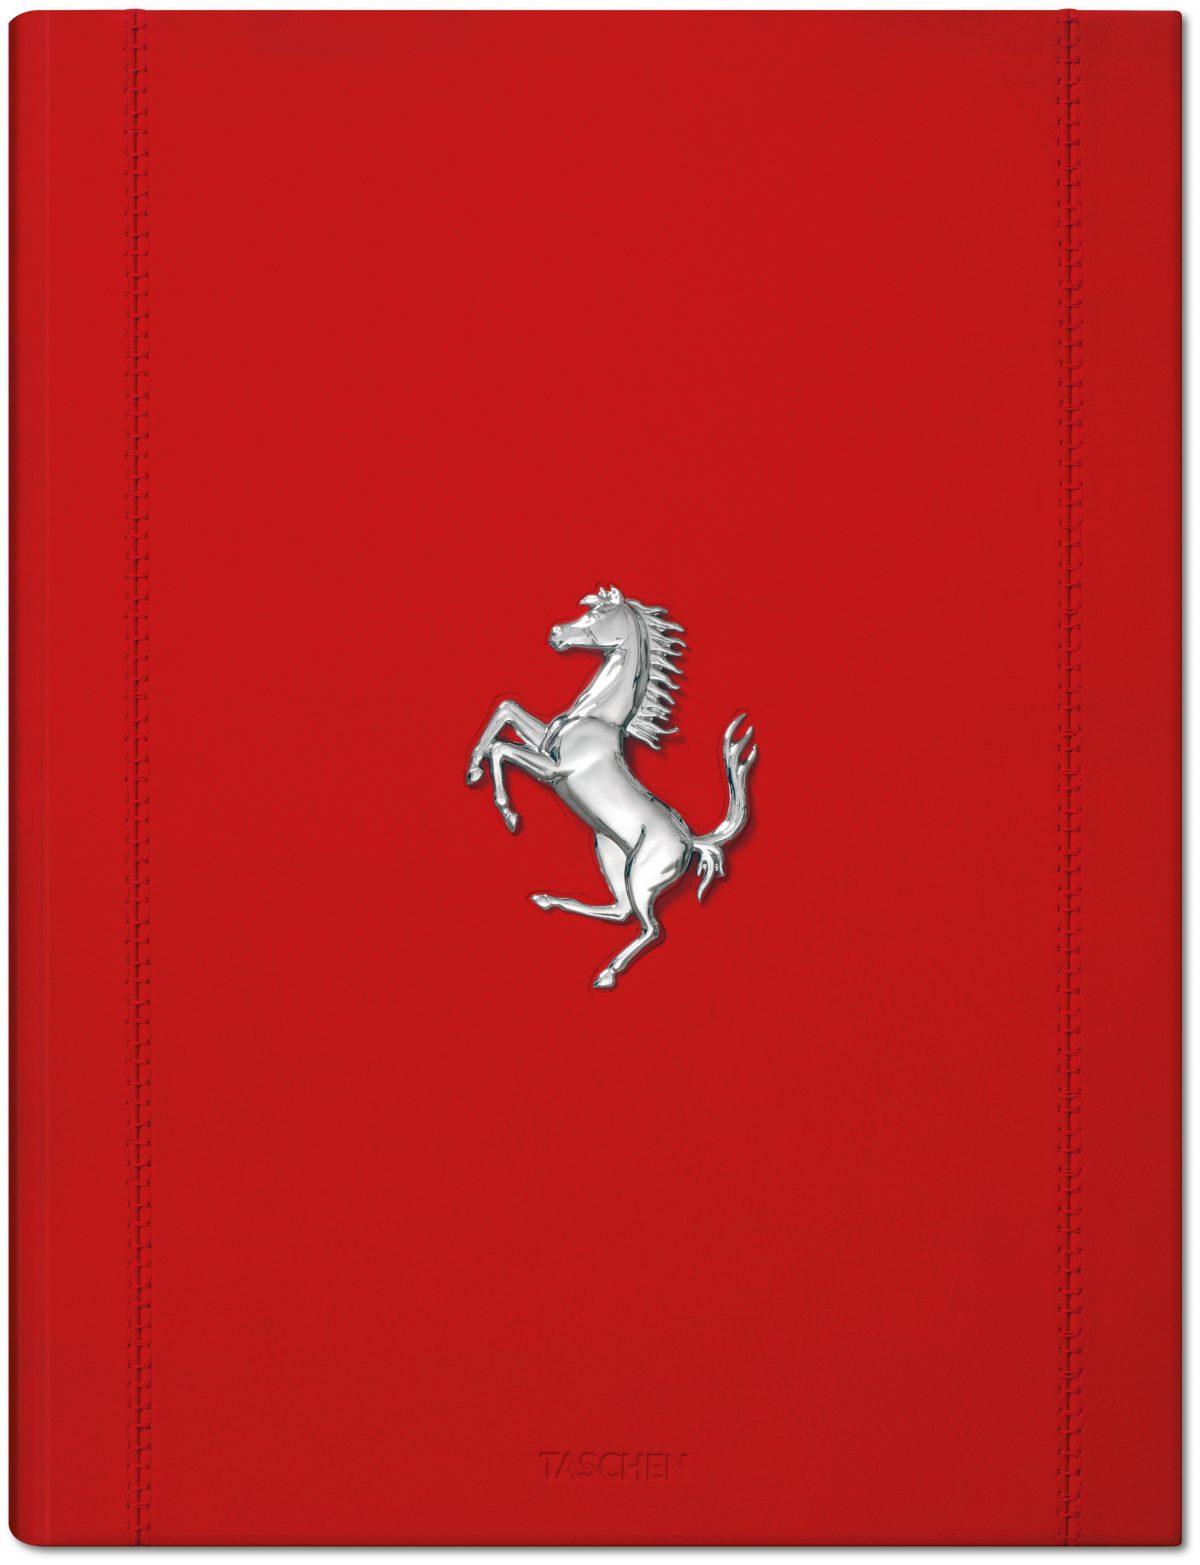 “Ferrari” collector’s edition, hand-stitched leather cover, 12.7 inches by 17 inches, 514 pages. (Taschen)